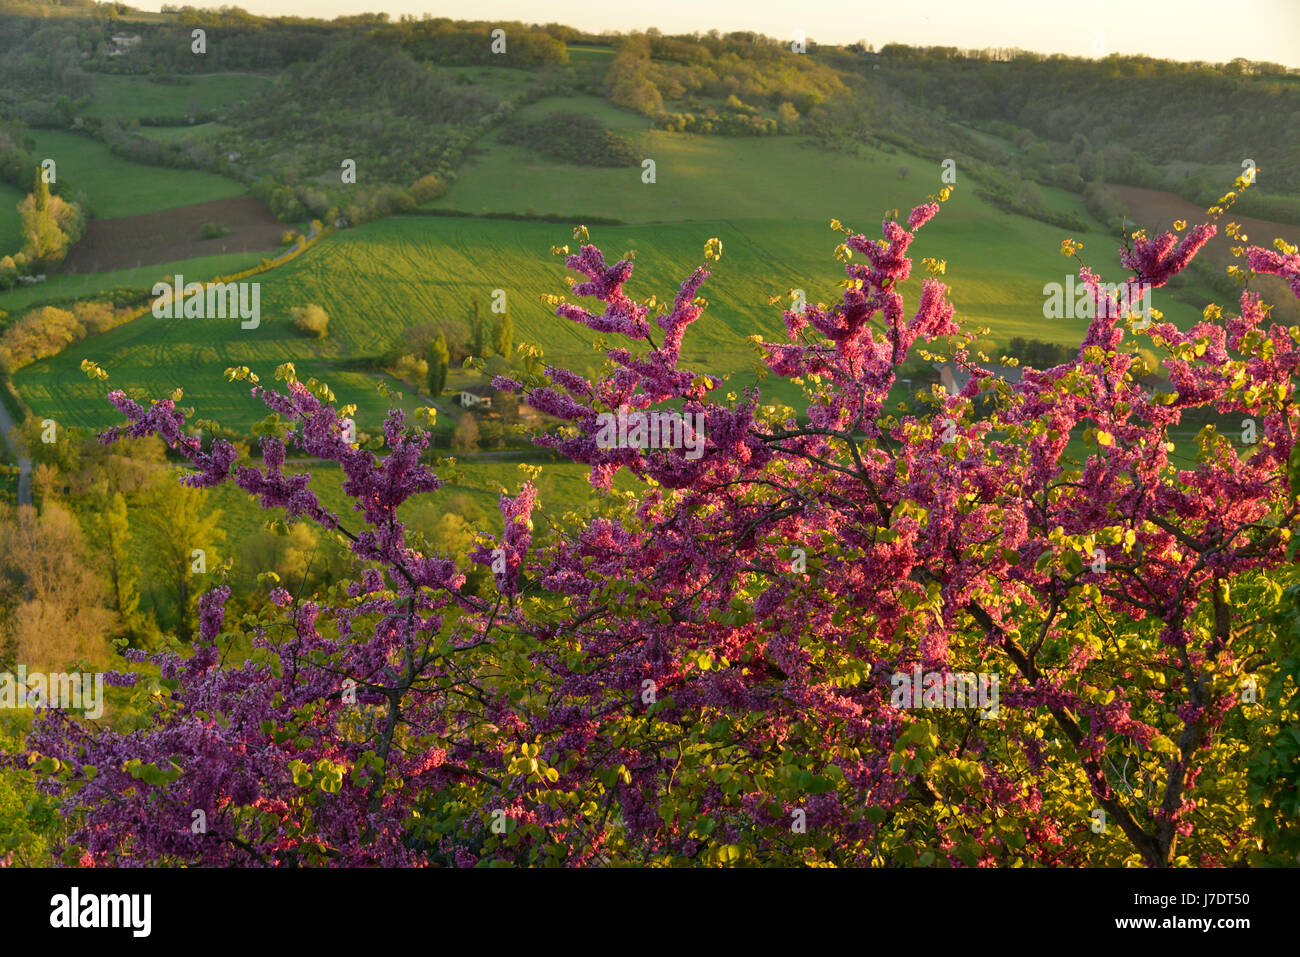 Pink flowers of a Judas tree in later afternoon light, with a green valley in the background. Occitanie, France. Stock Photo